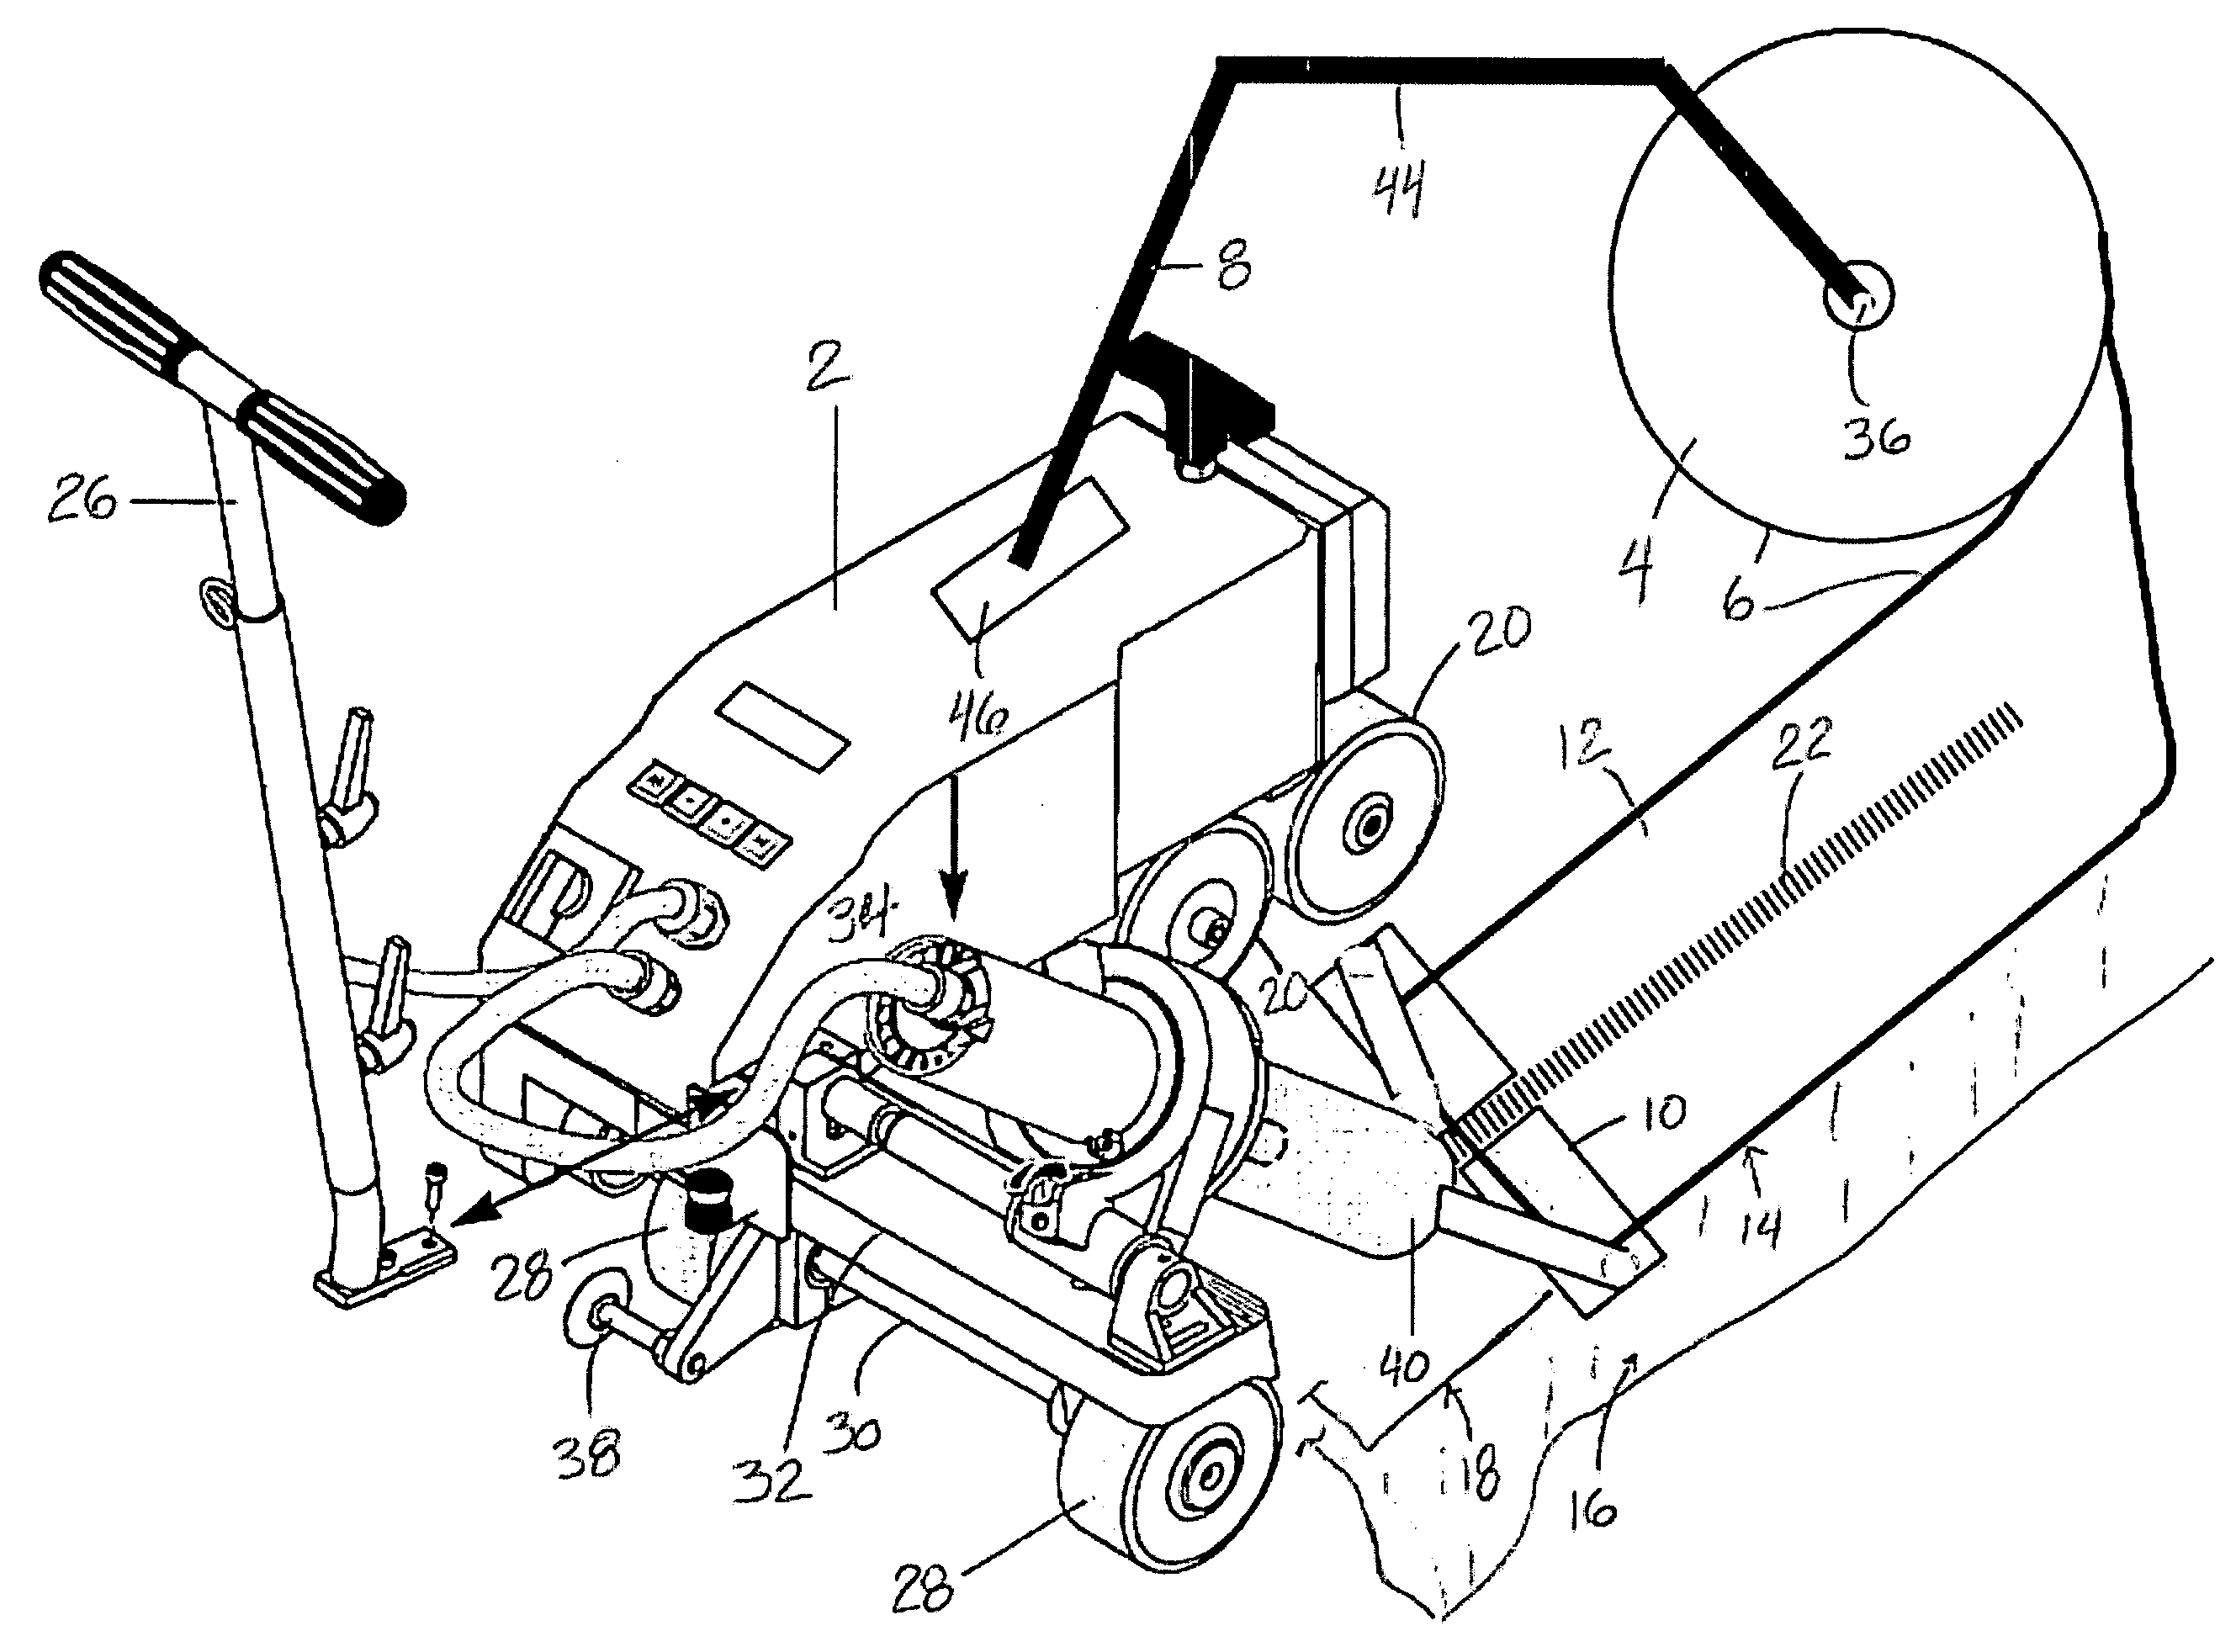 Apparatus for creating an encased cable seam